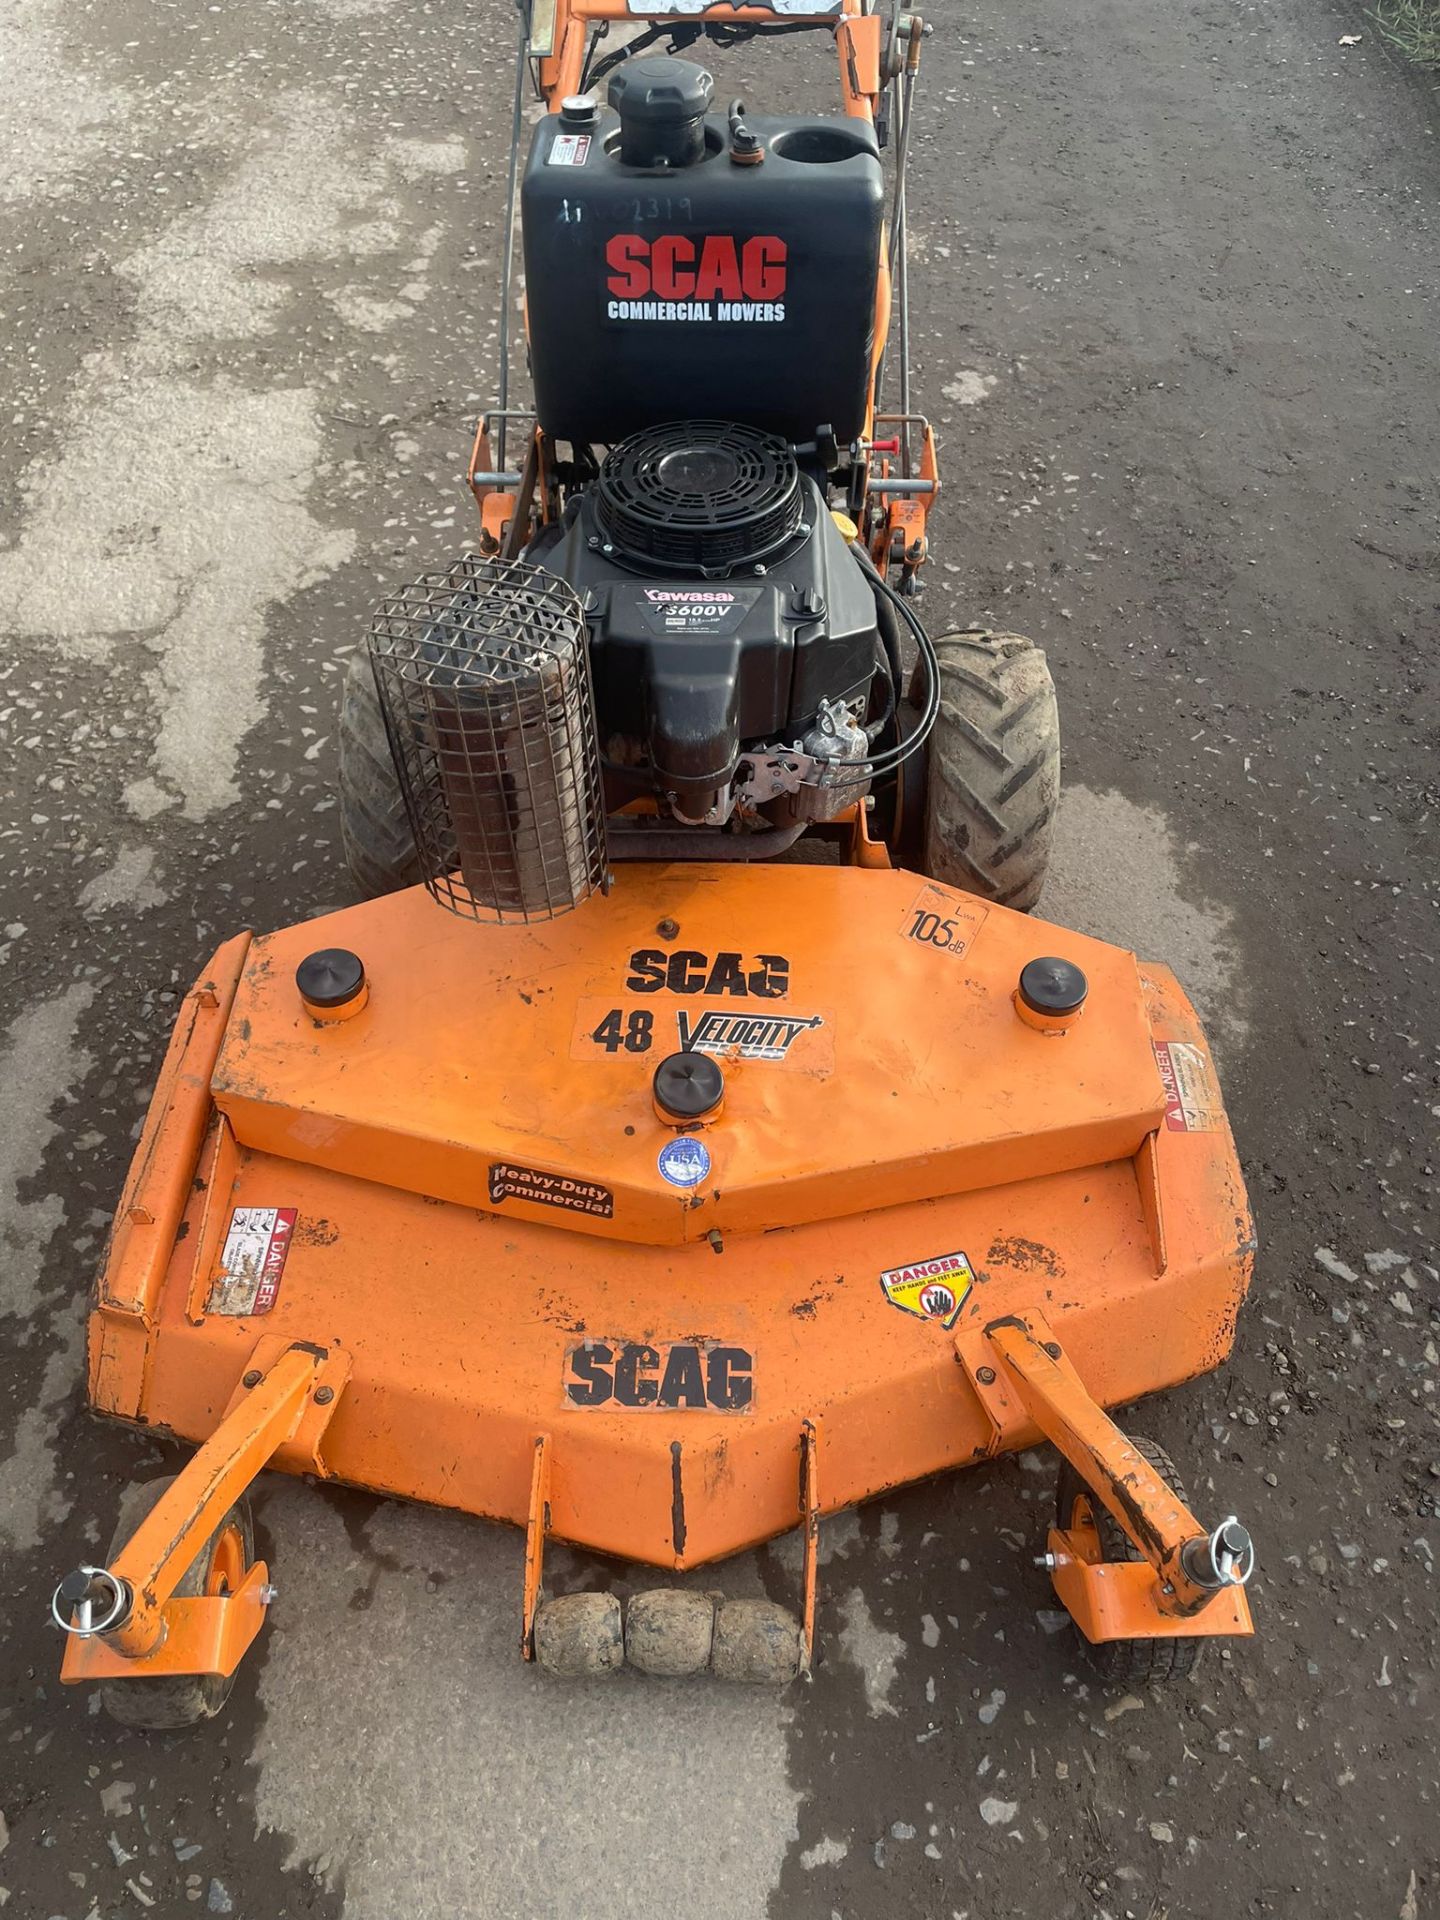 SCAG 48" COMMERCIAL PEDESTRIAN MOWER REAR DISCHARGE, RUNS DRIVES AND CUTS, YEAR 2012 *NO VAT* - Image 7 of 7